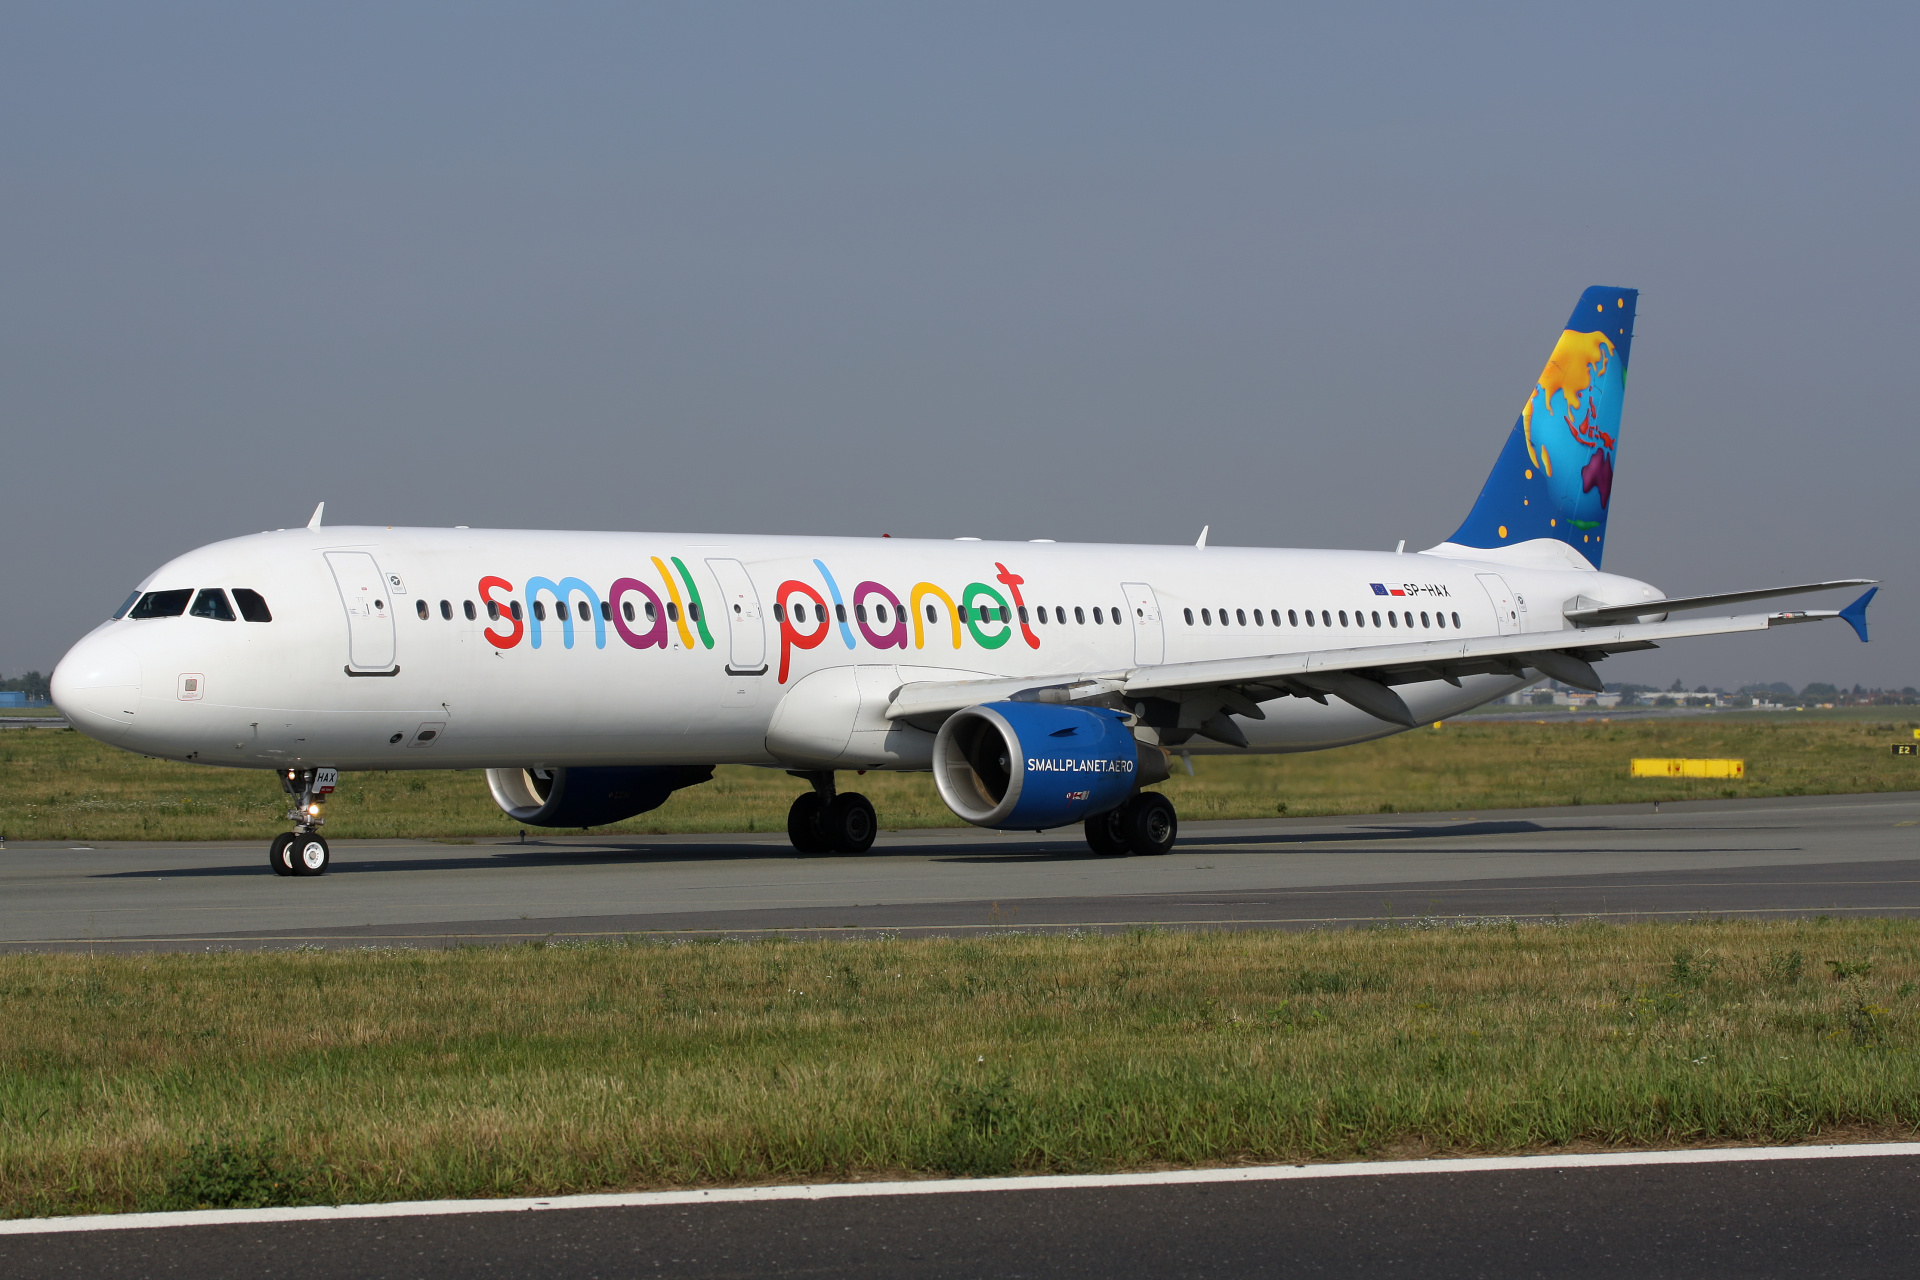 SP-HAX (Aircraft » EPWA Spotting » Airbus A321-200 » Small Planet Airlines Polska)